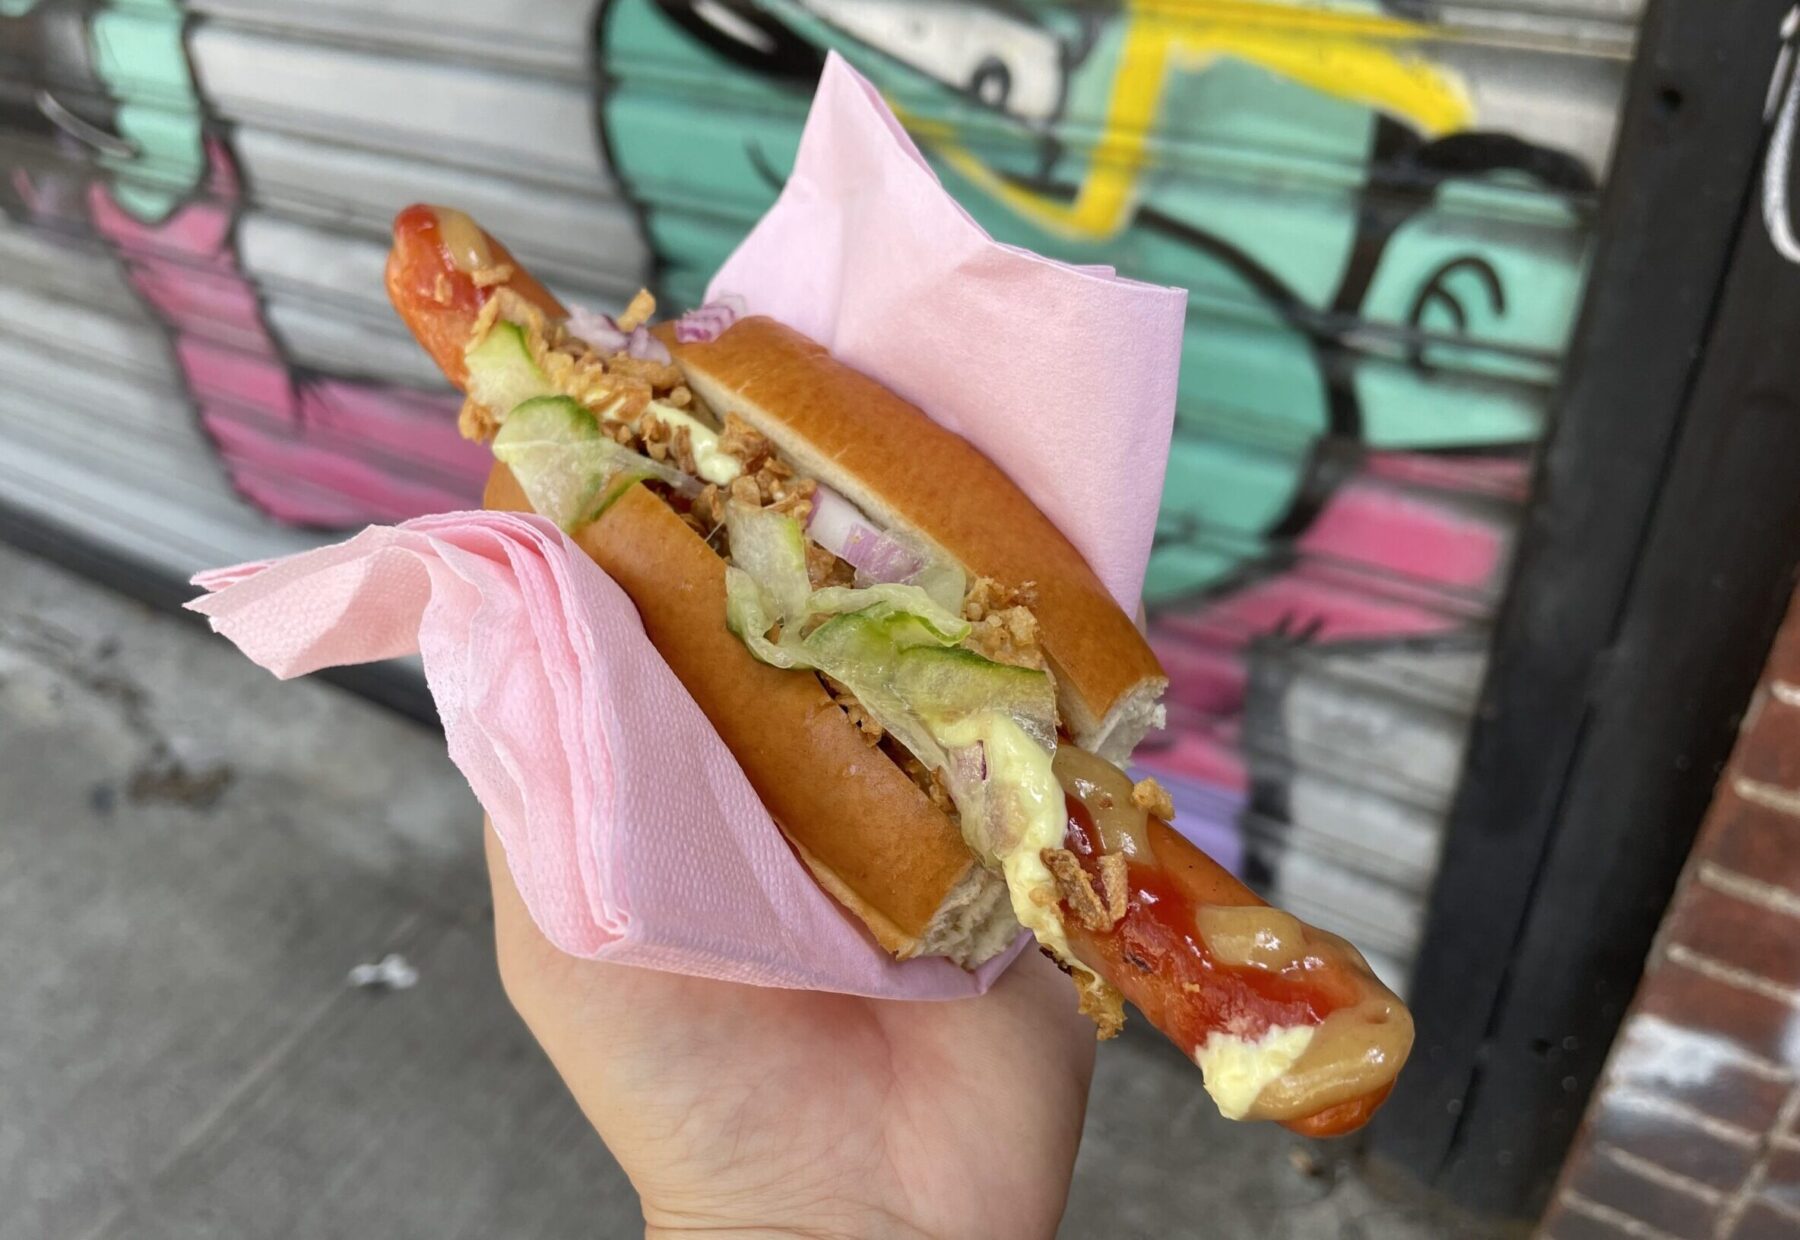 Swedish Hot Dog from Lenny's Swedish Hot Dog Stand on the Lower East Side